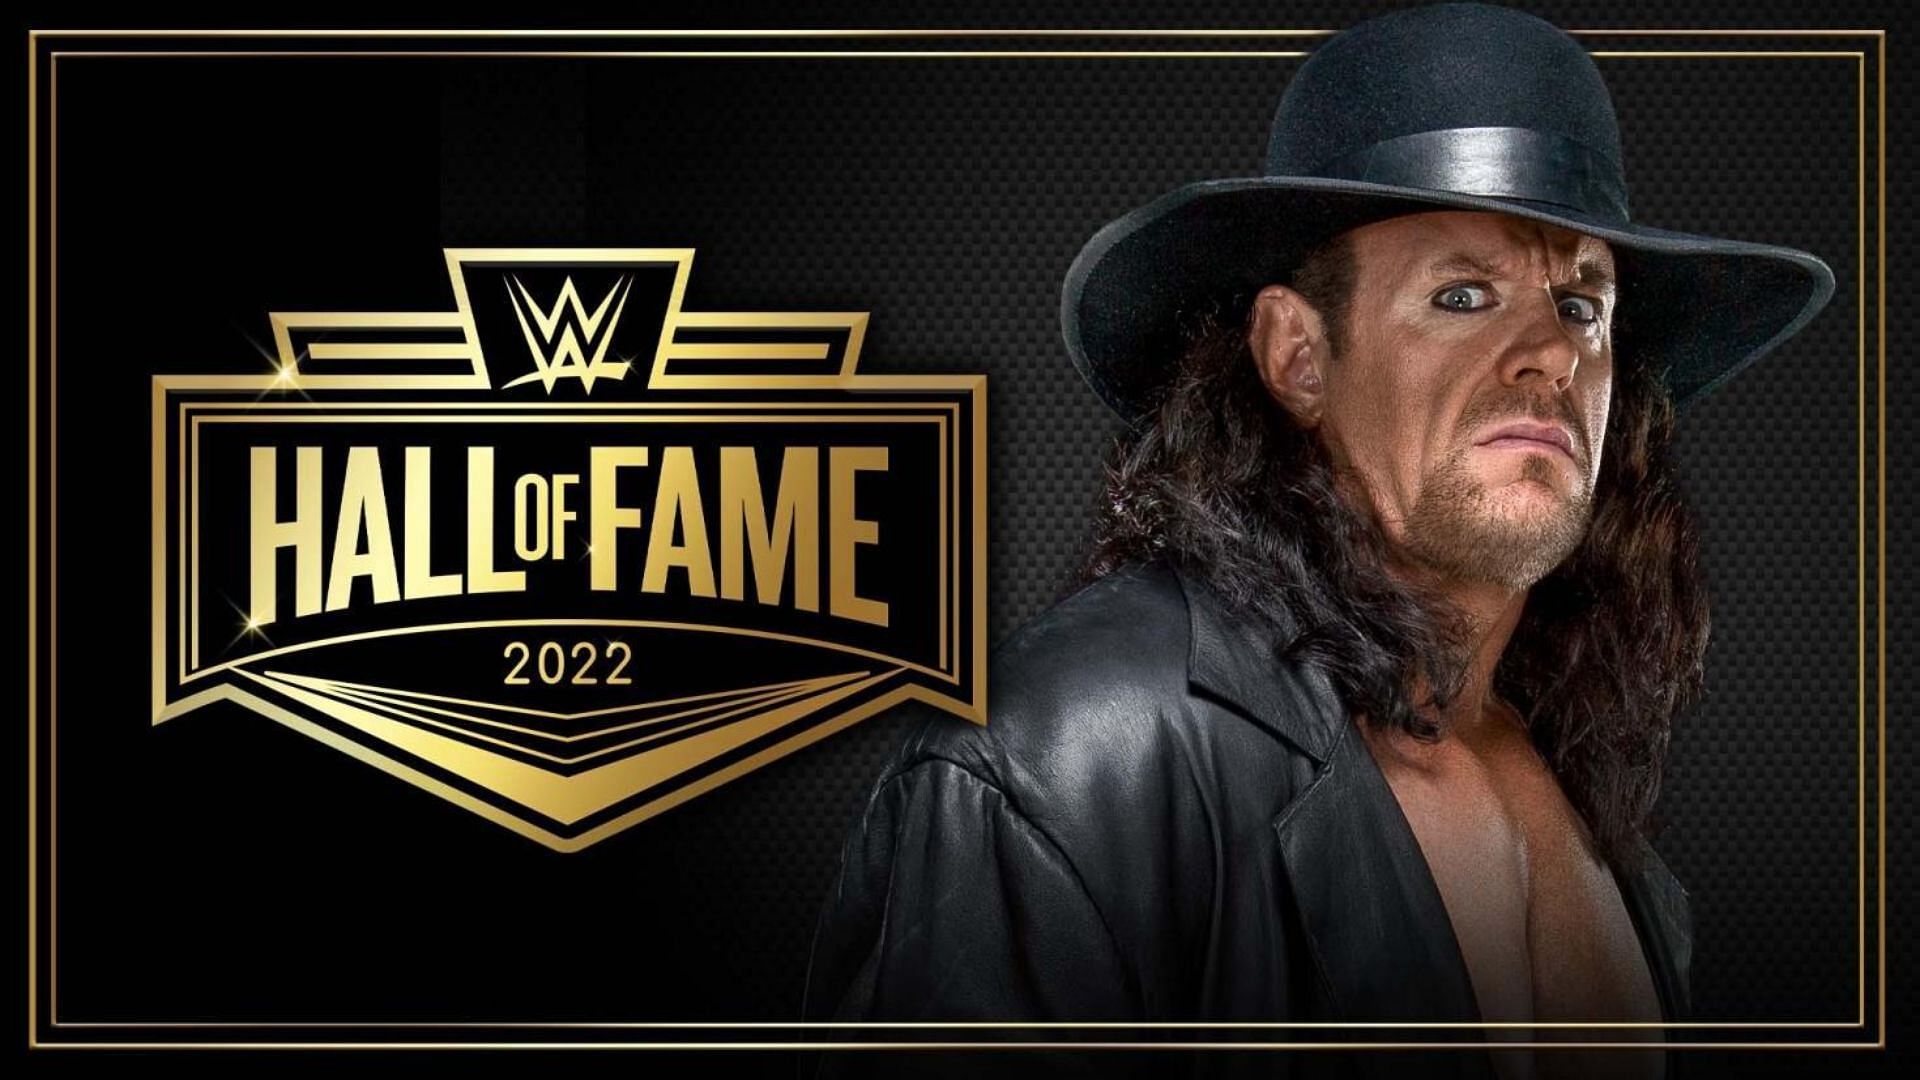 Undertaker was the first inductee announced for the 2022 Hall of Fame